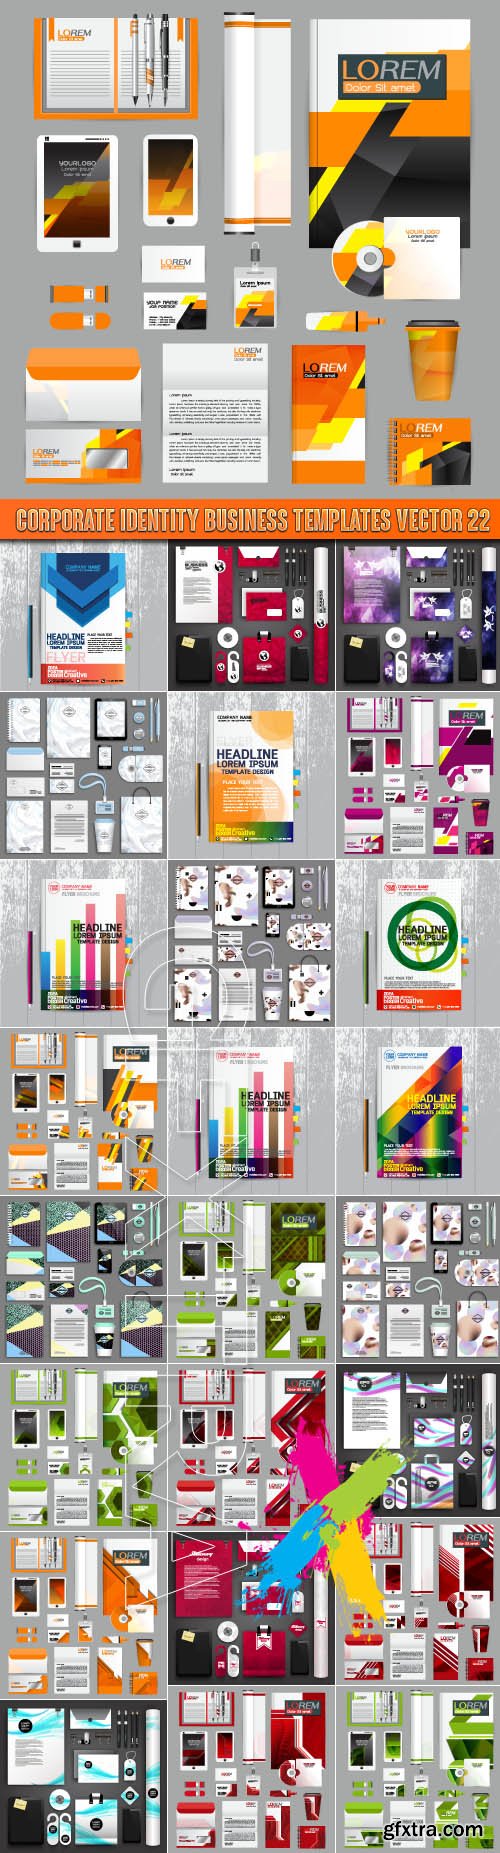 Corporate identity business templates vector 22